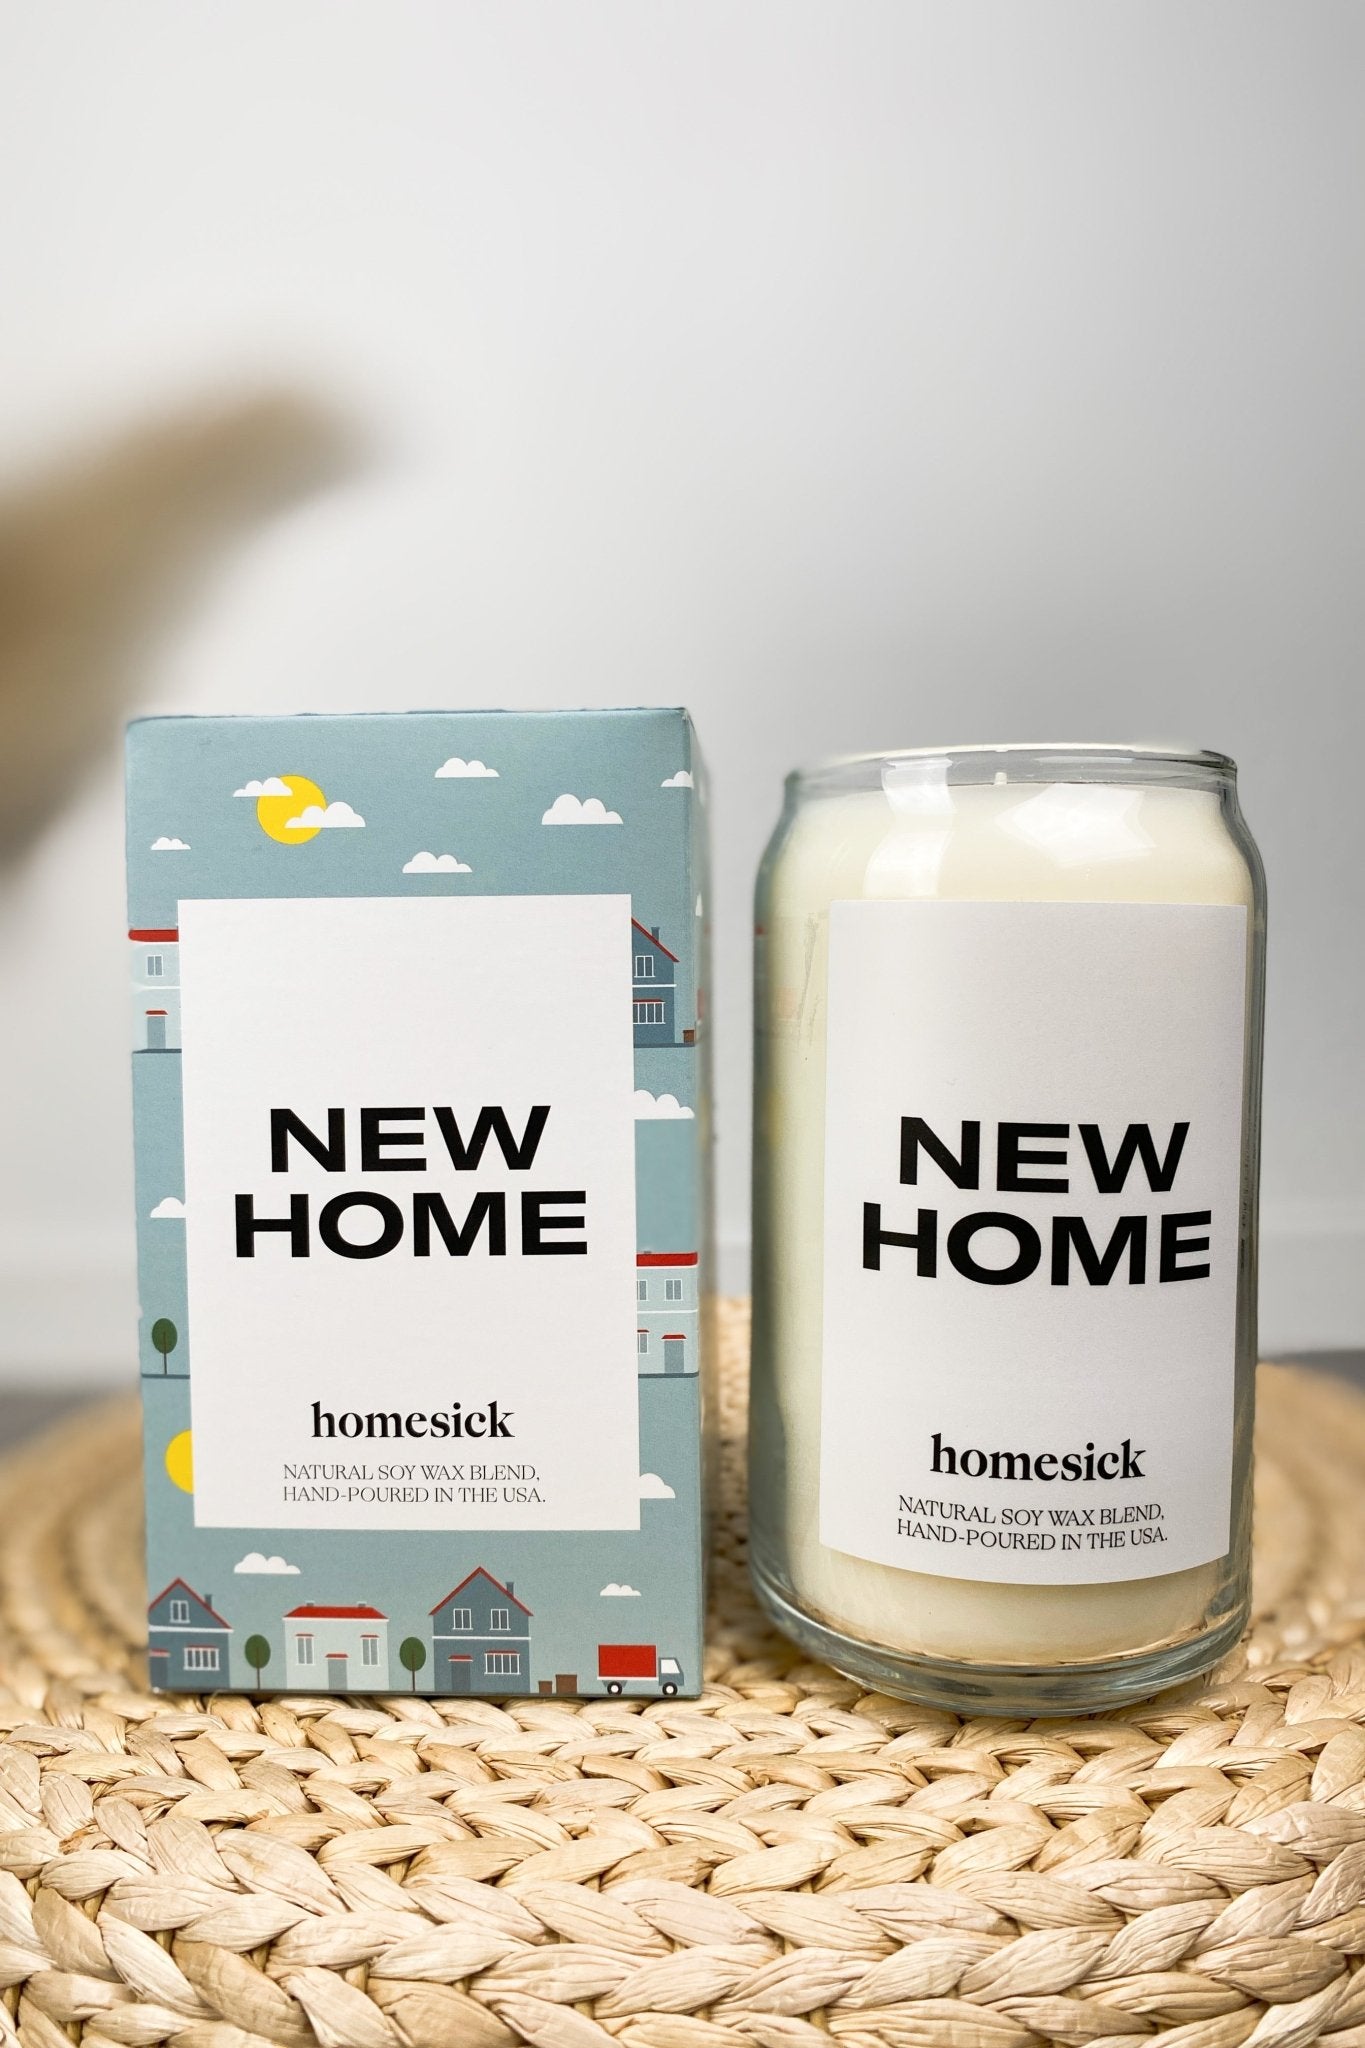 Homesick new home candle - Trendy Candles at Lush Fashion Lounge Boutique in Oklahoma City